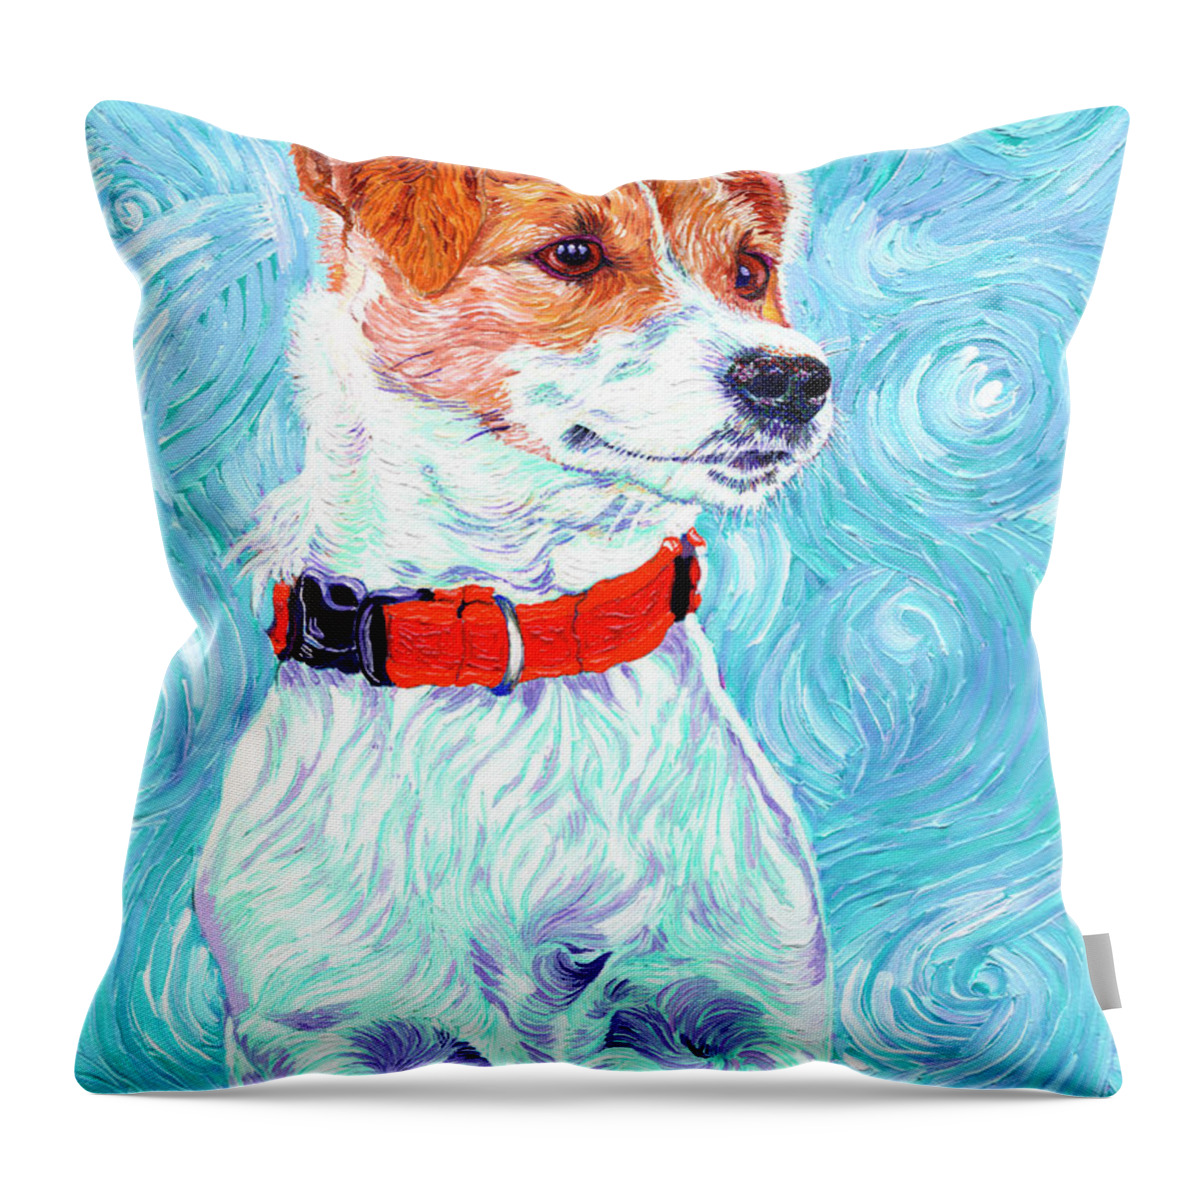 Jack Russell Throw Pillow featuring the painting Thaddy Boy 2 by Xavier Francois Hussenet